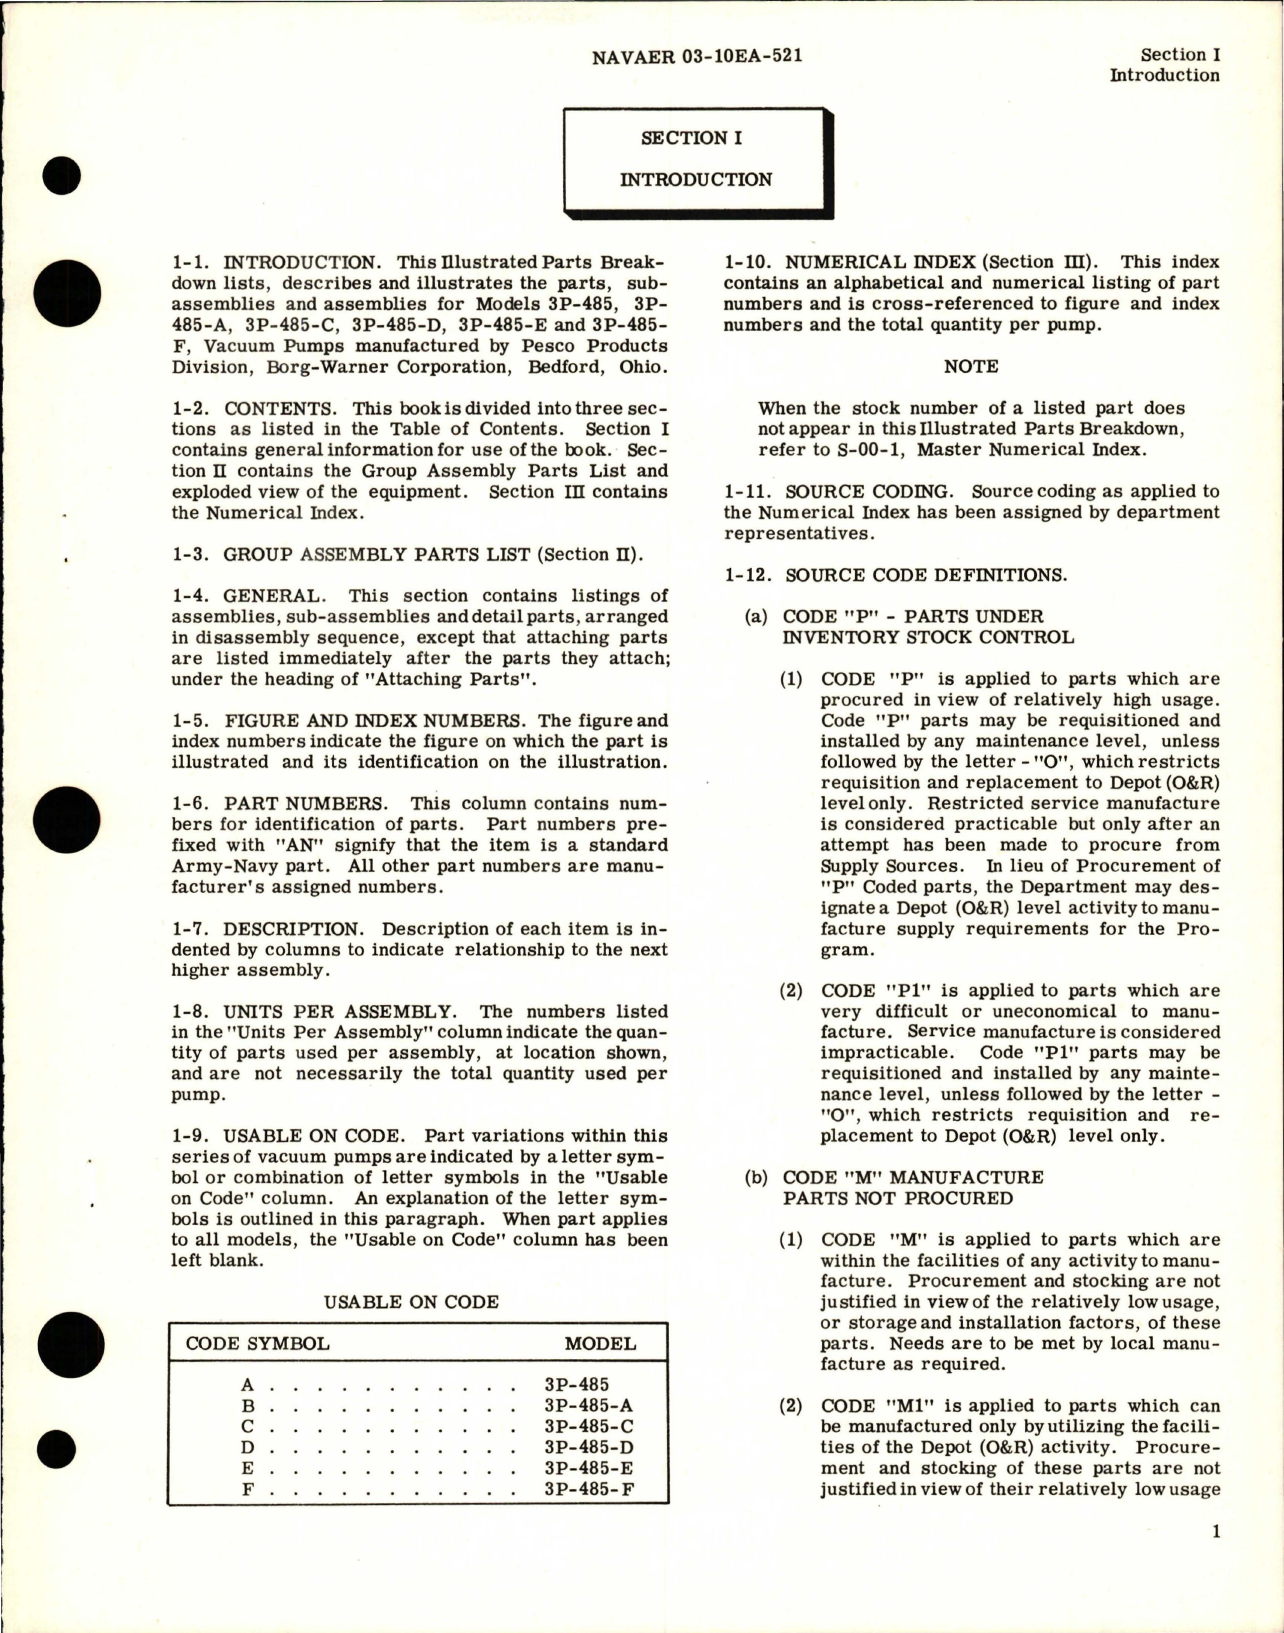 Sample page 5 from AirCorps Library document: Illustrated Parts Breakdown for Vacuum Pump Assembly